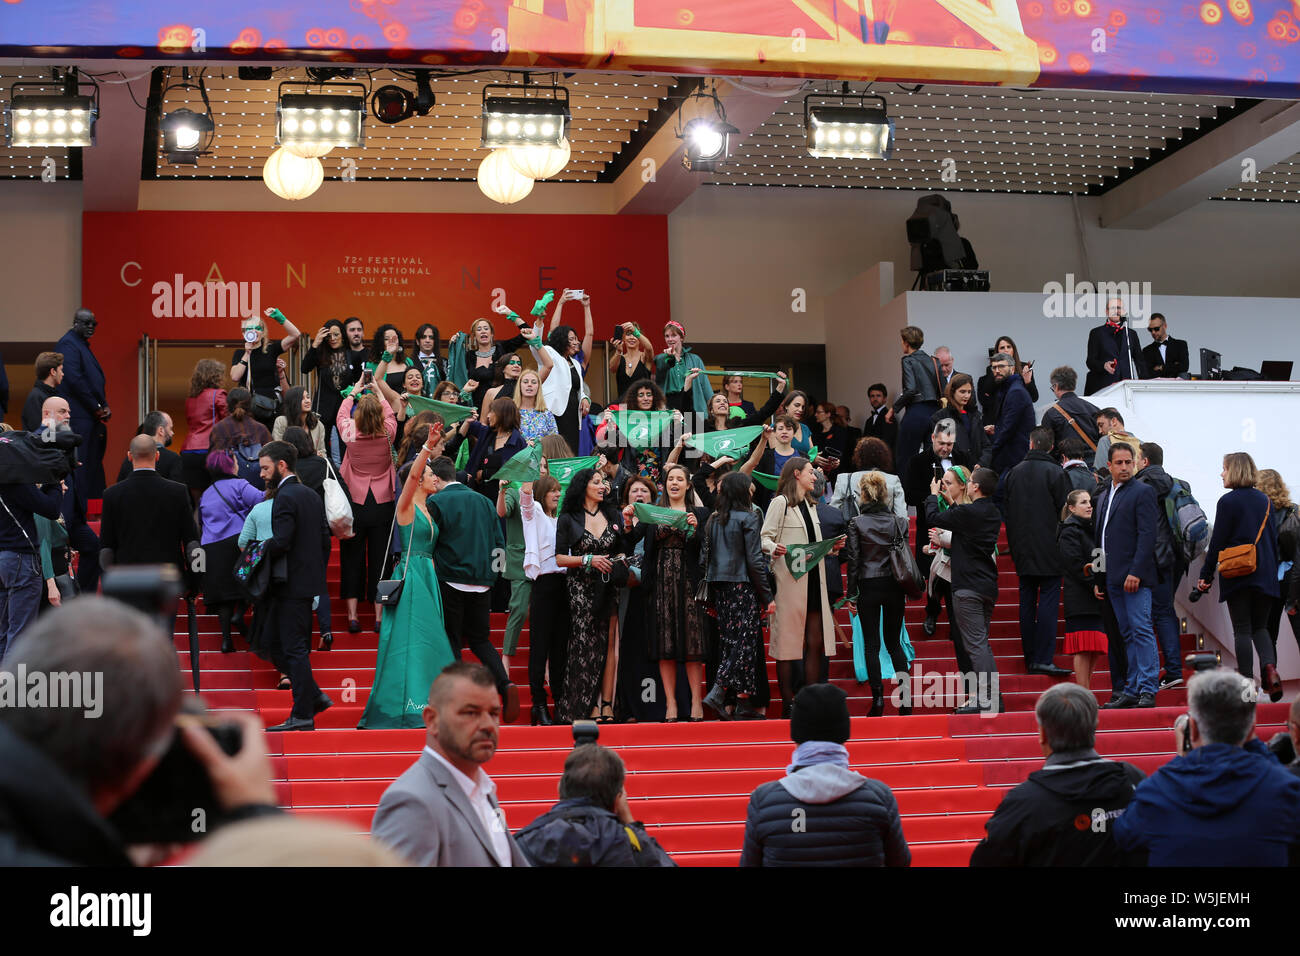 CANNES, FRANCE - MAY 18: protesters attend The Wild Goose Lake screening during the 72nd Cannes Film Festival (Mickael Chavet) Stock Photo